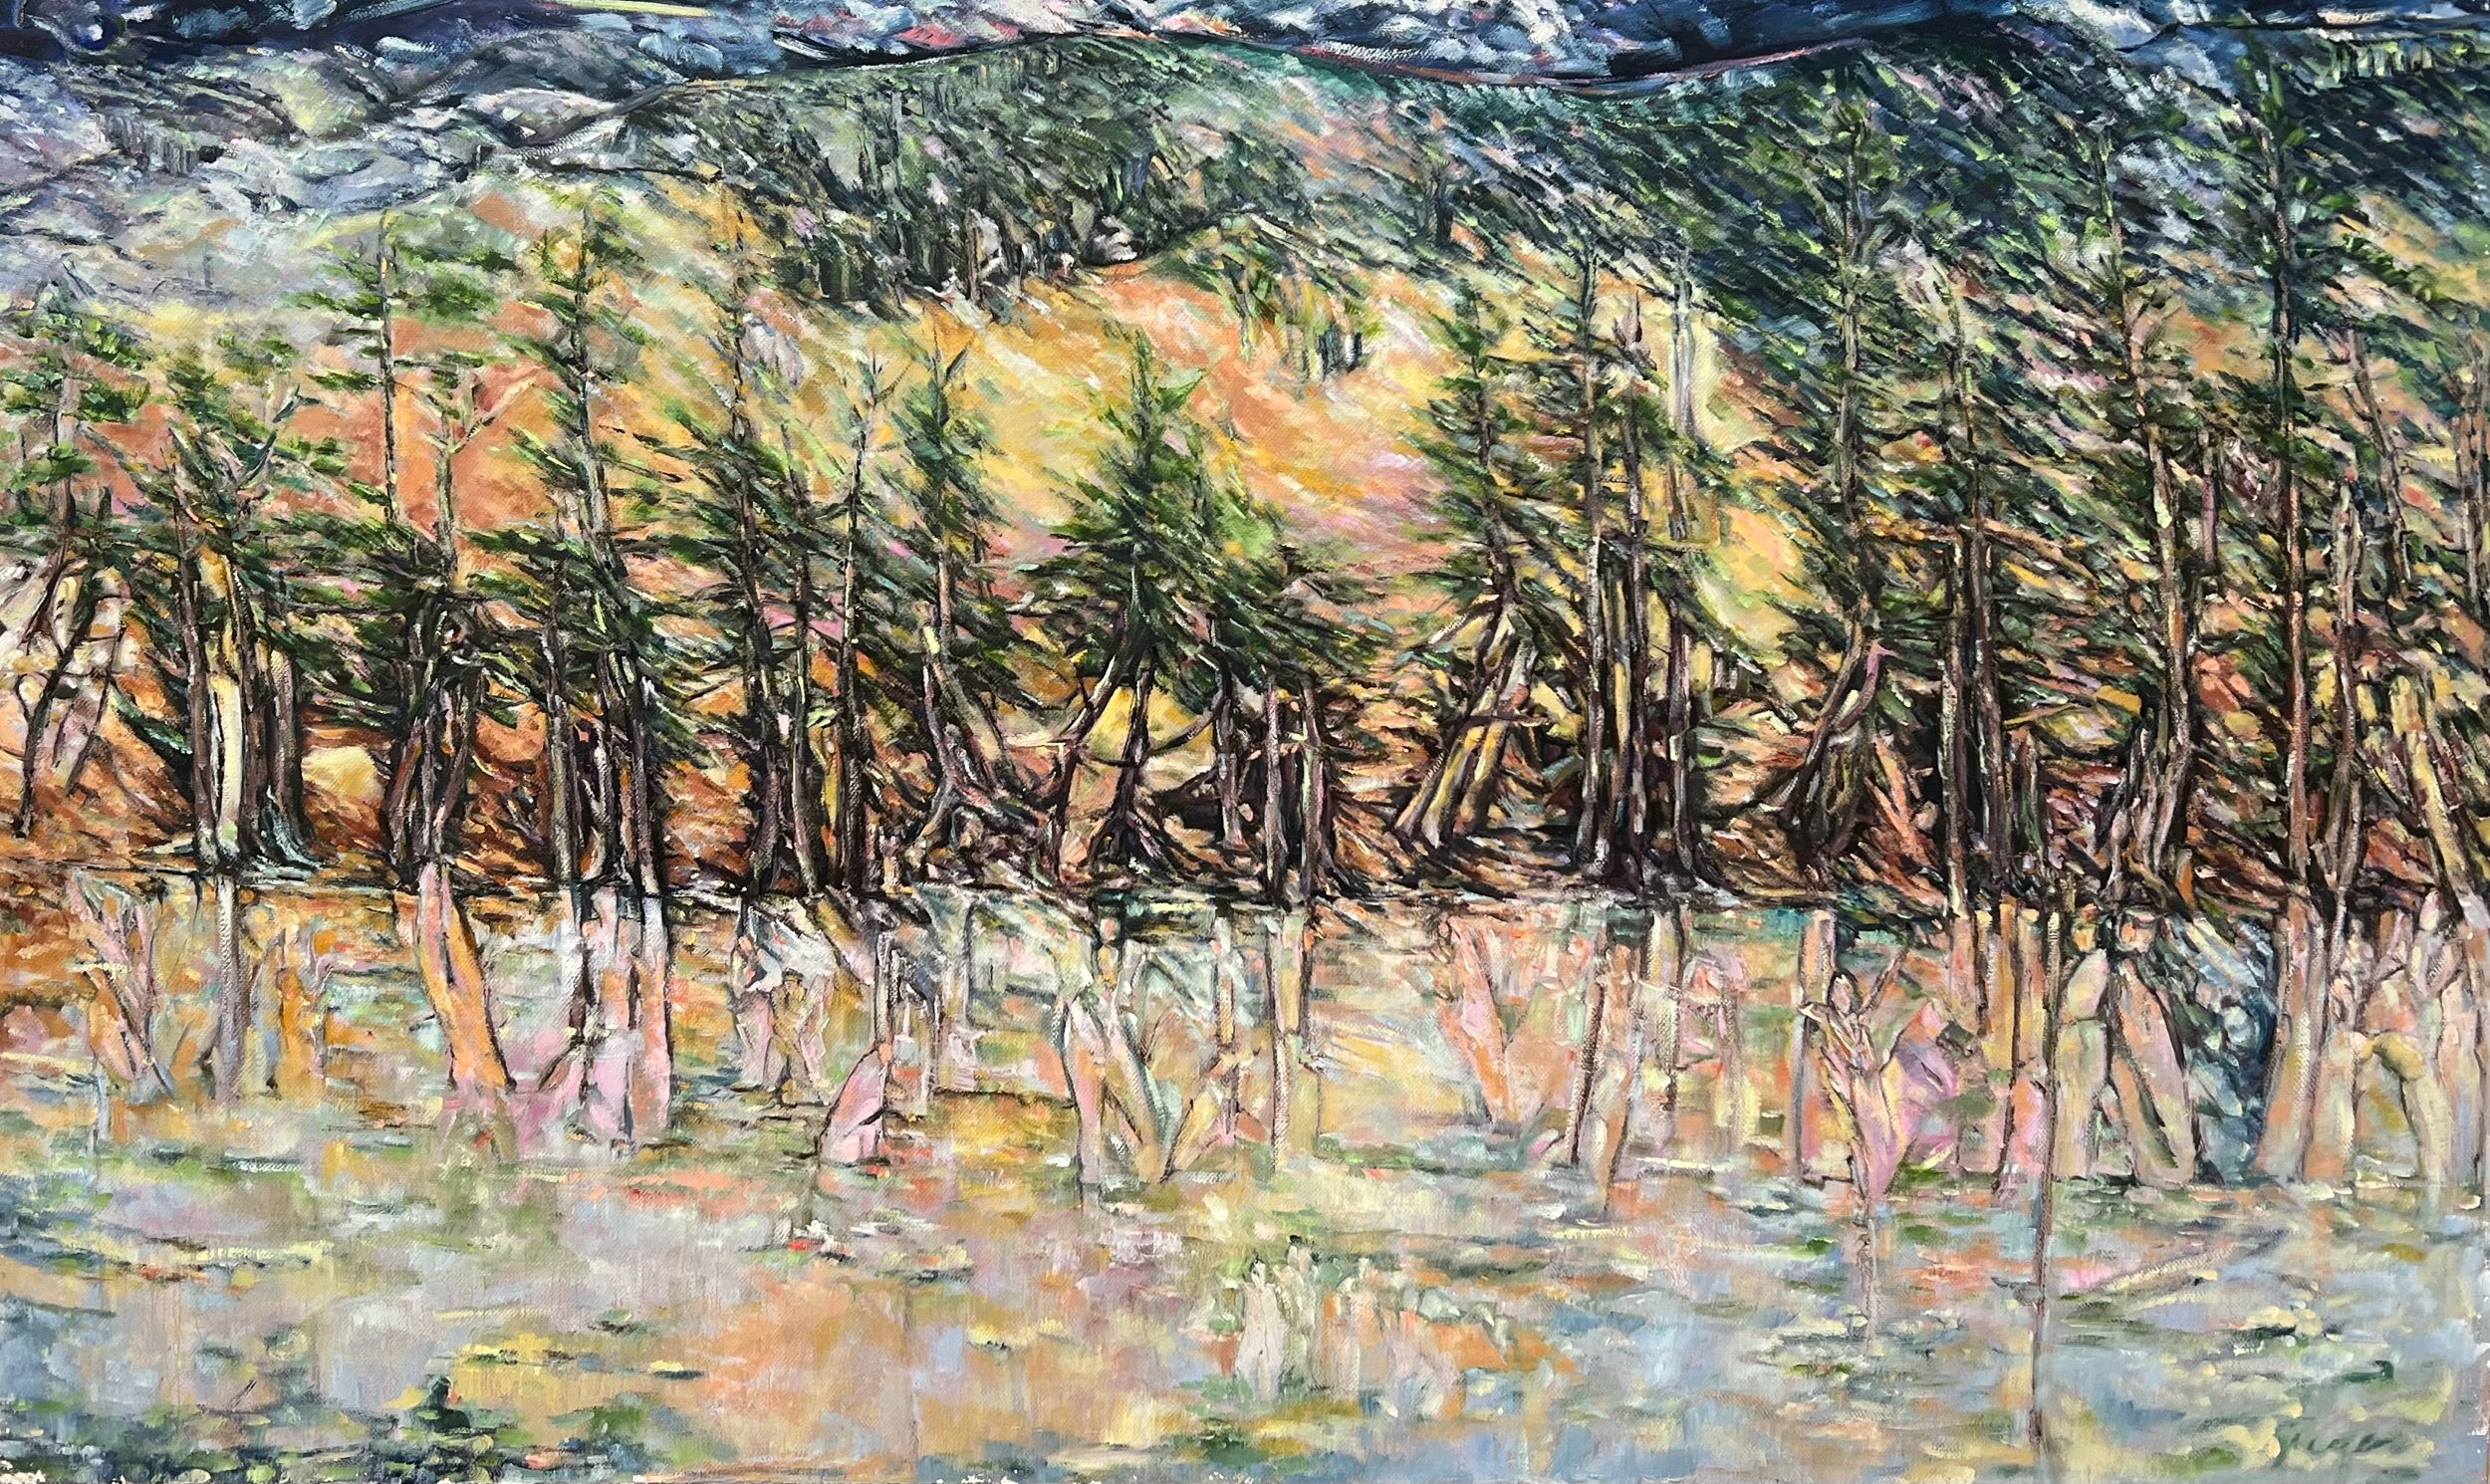 Reflective Forest with Figures and Spirits